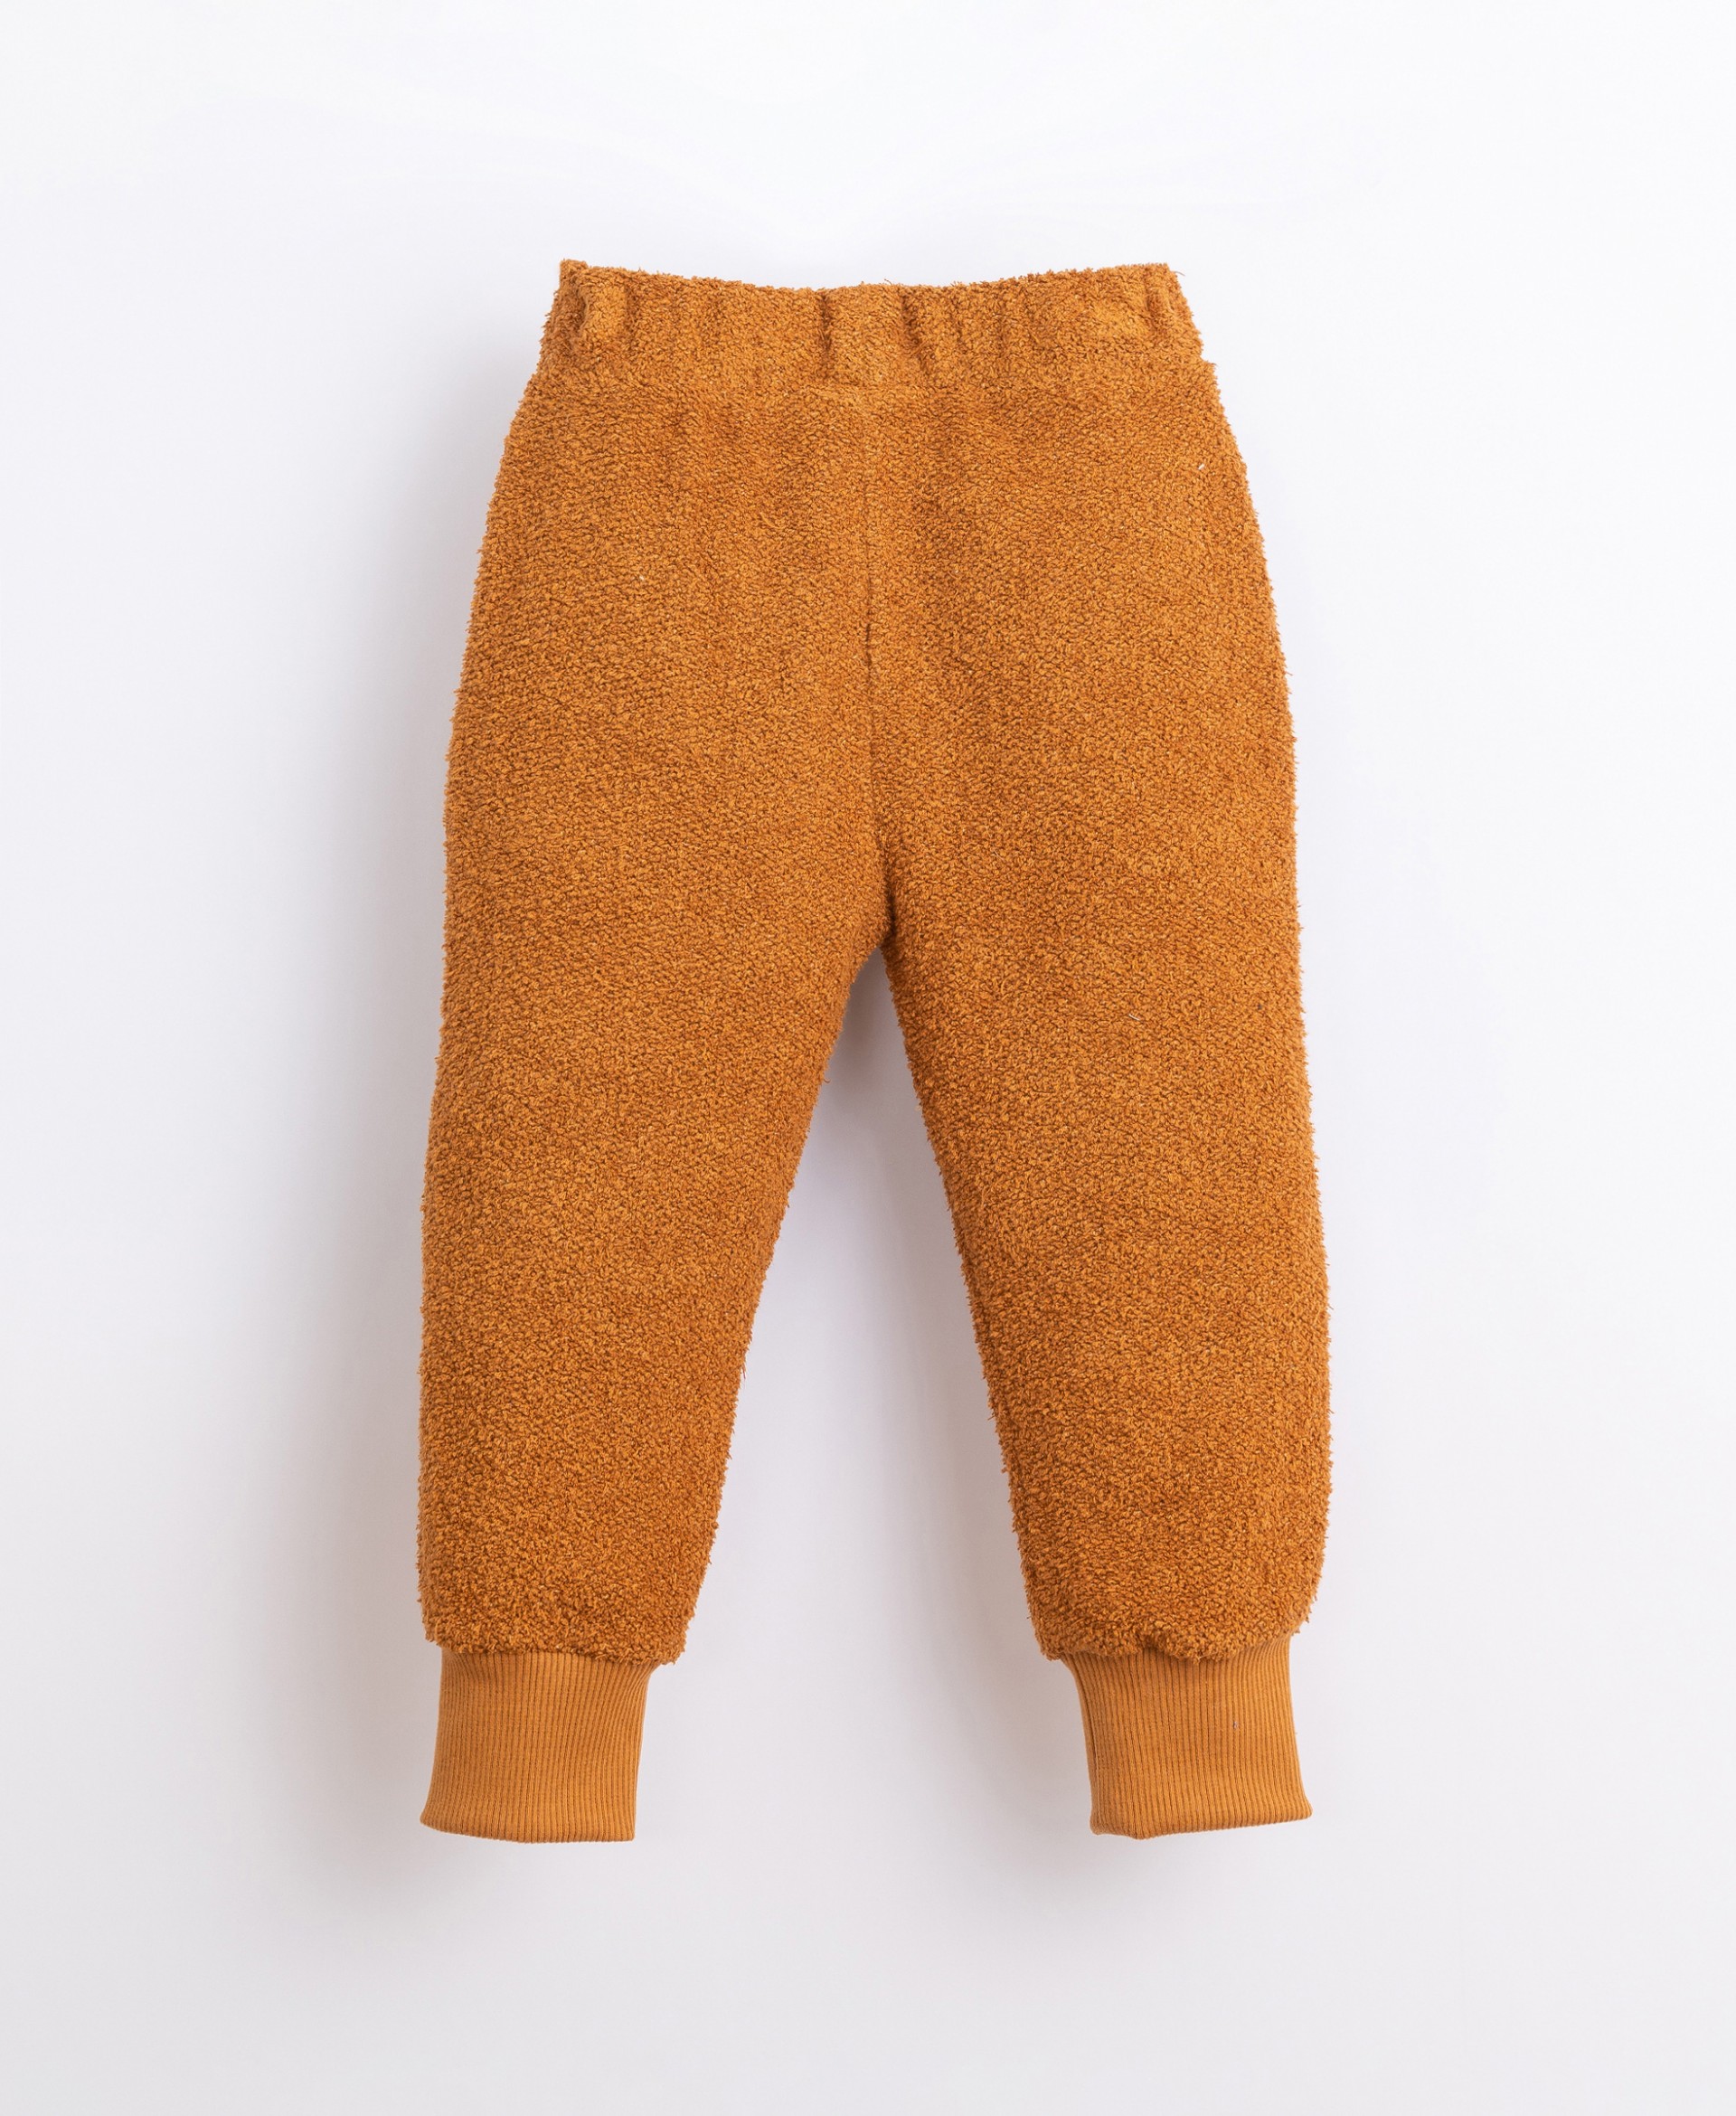 Jersey stitch trousers with pockets | Illustration